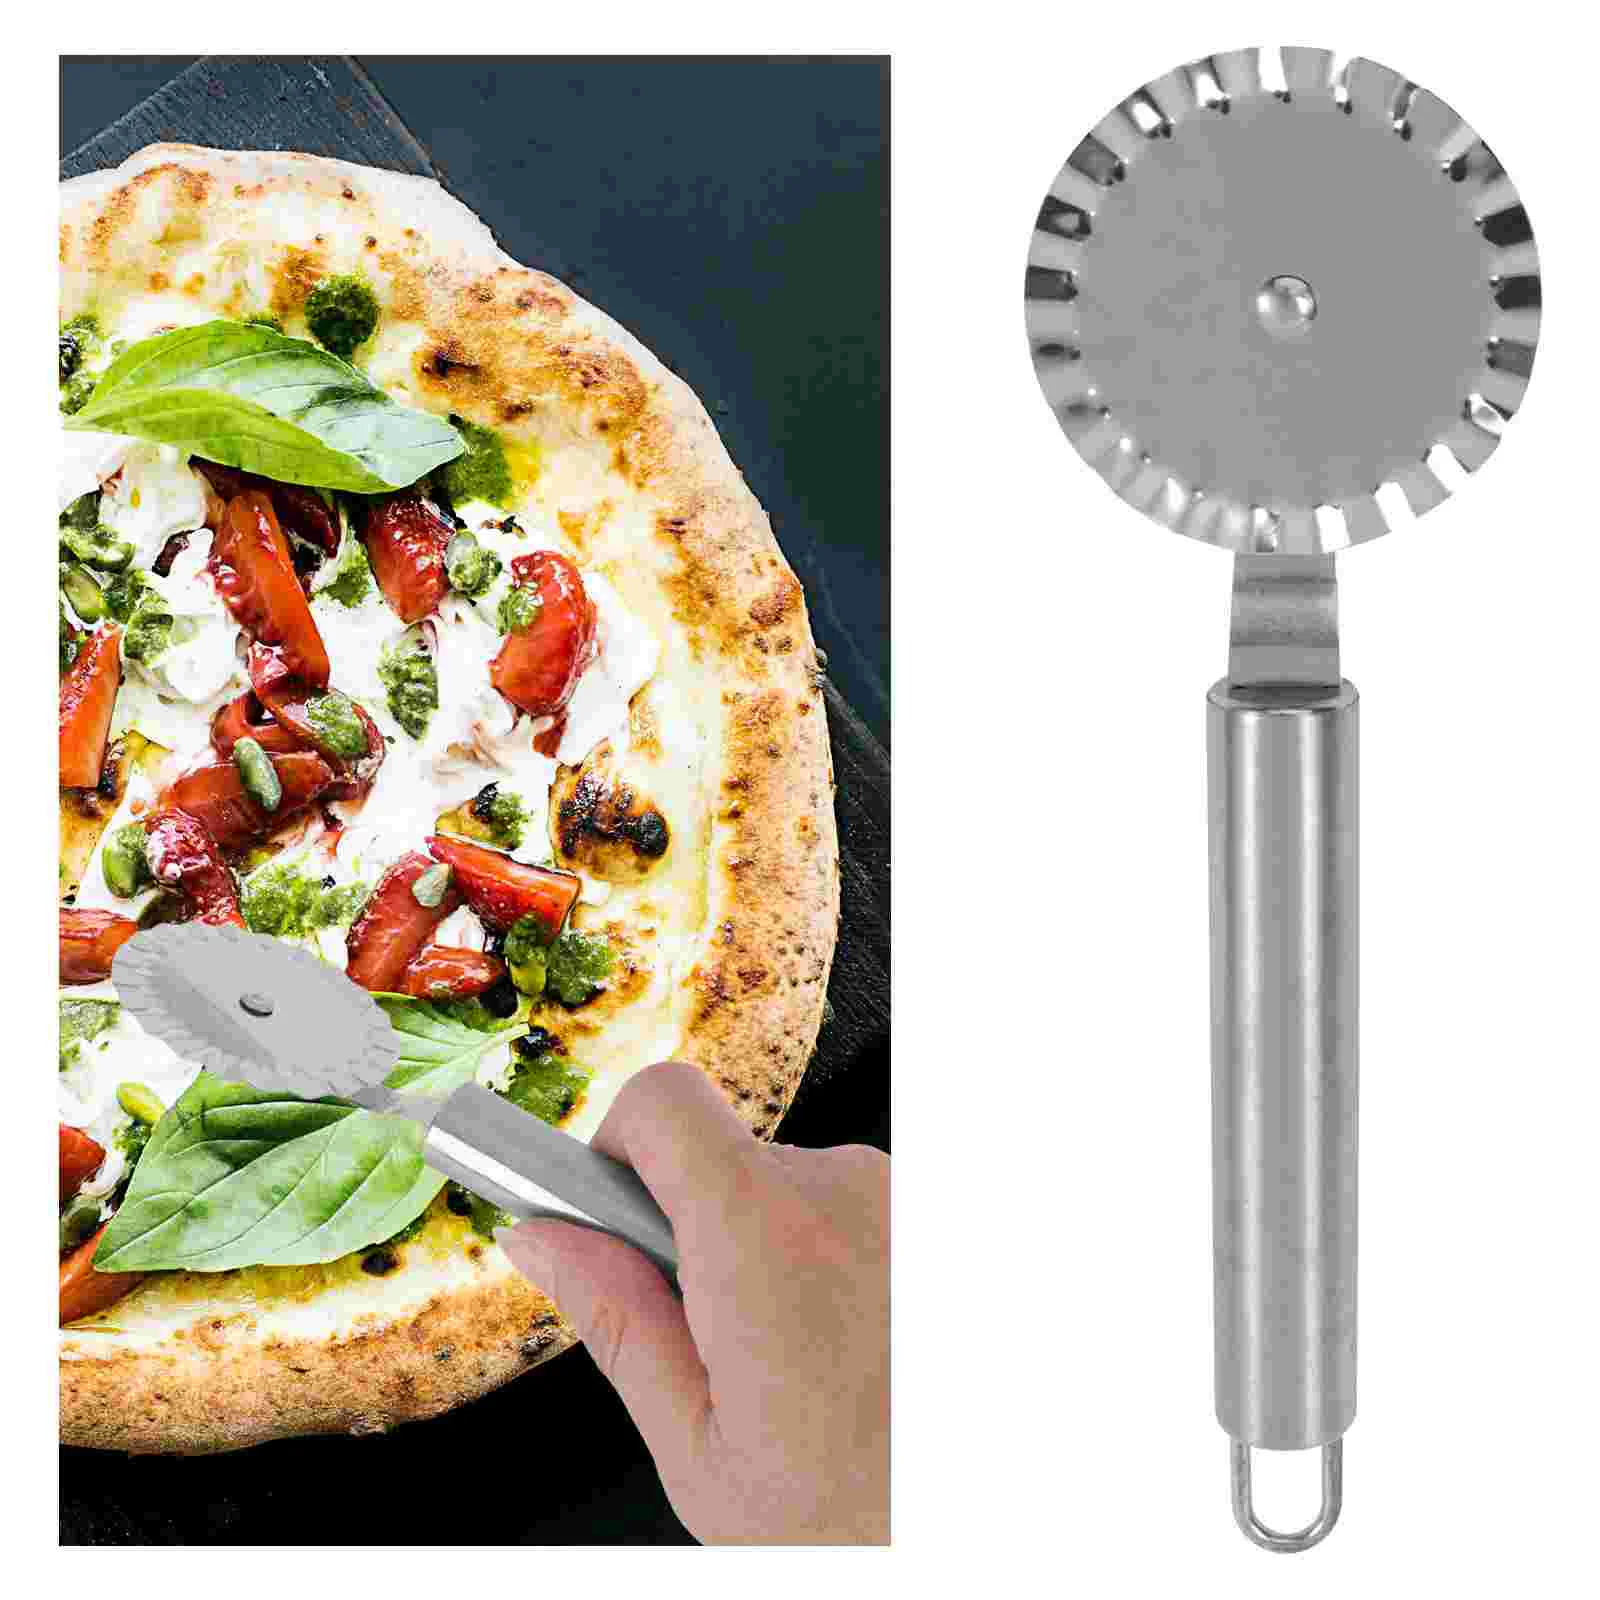 

Pizza Wheel Pastry Stainless Steel Ravioli Slicer Pasta Tool Wheels Slice Roller Round Rolling Dough Cutting Set Pin Handle